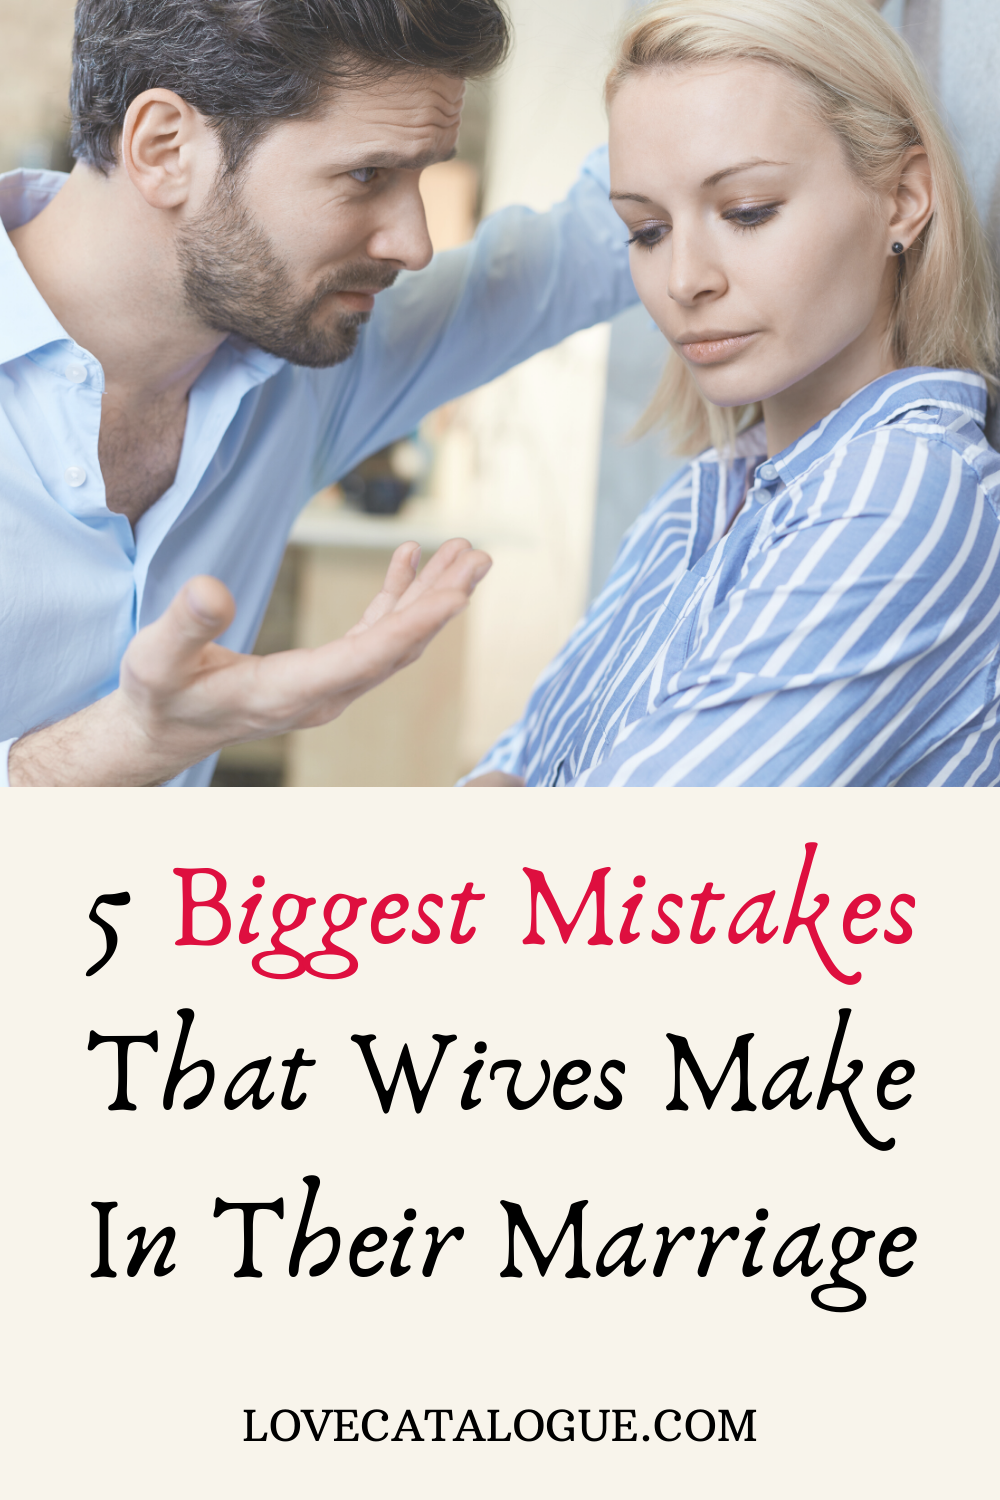 Mistakes in relationship